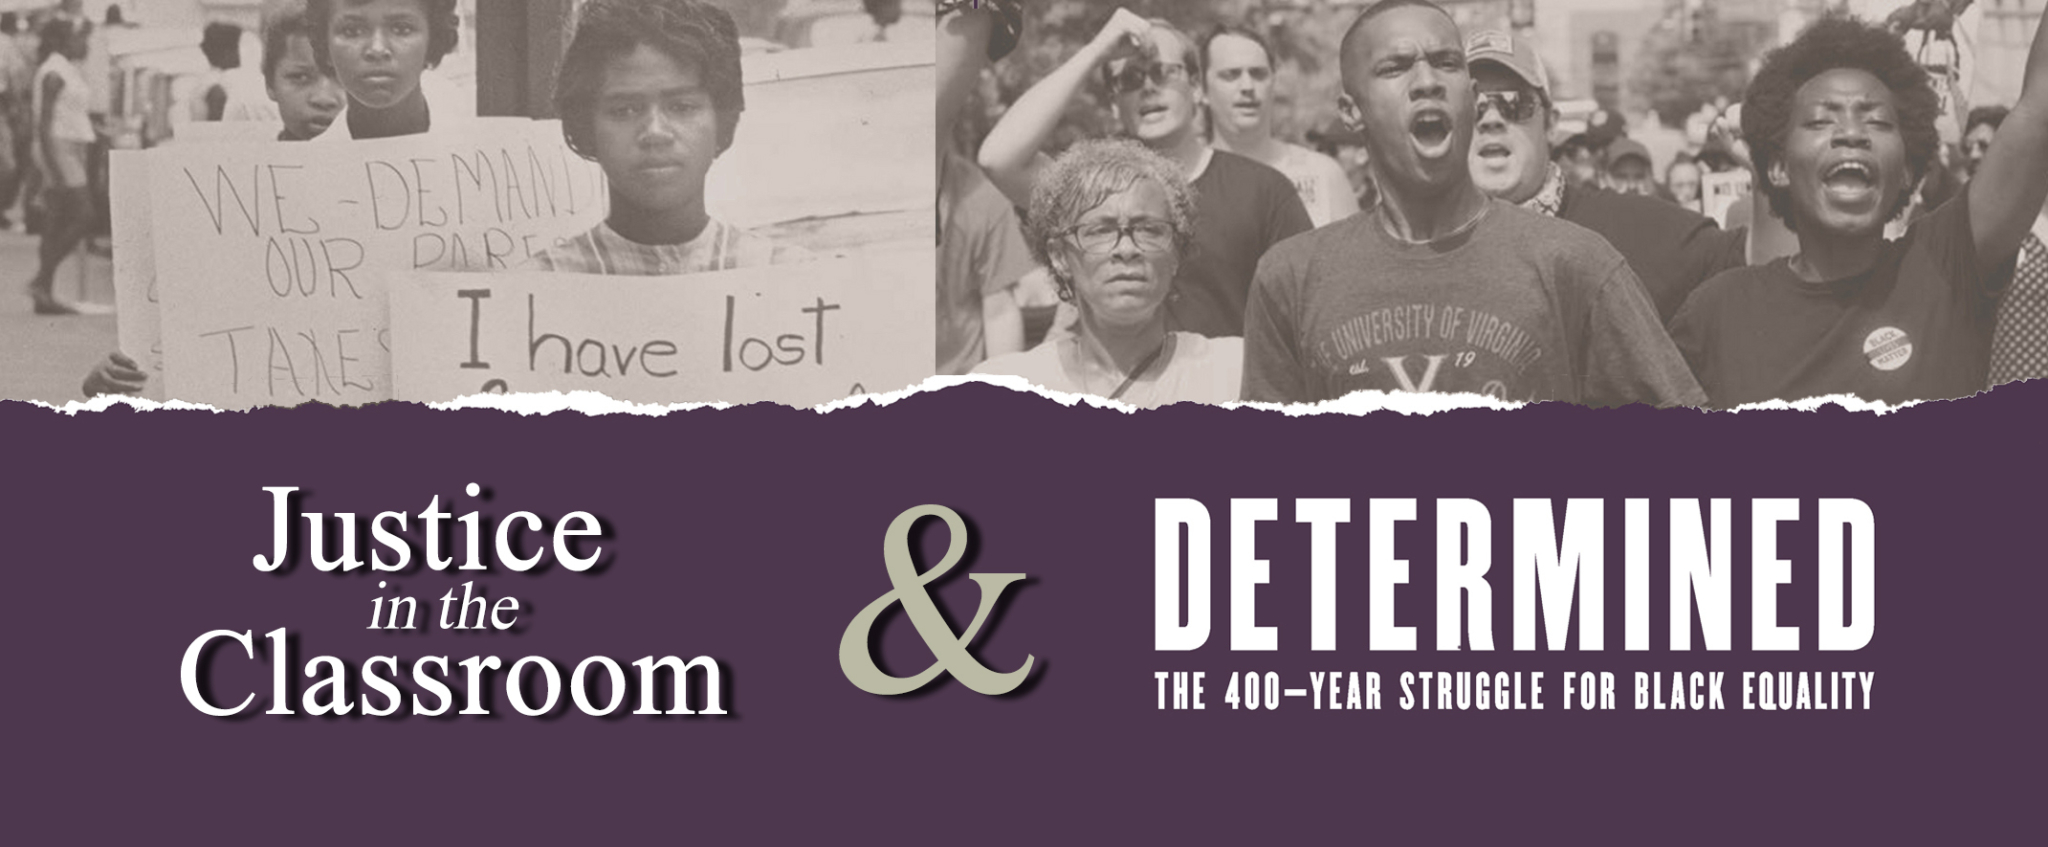 Justice in the Classroom & Determined Header Image